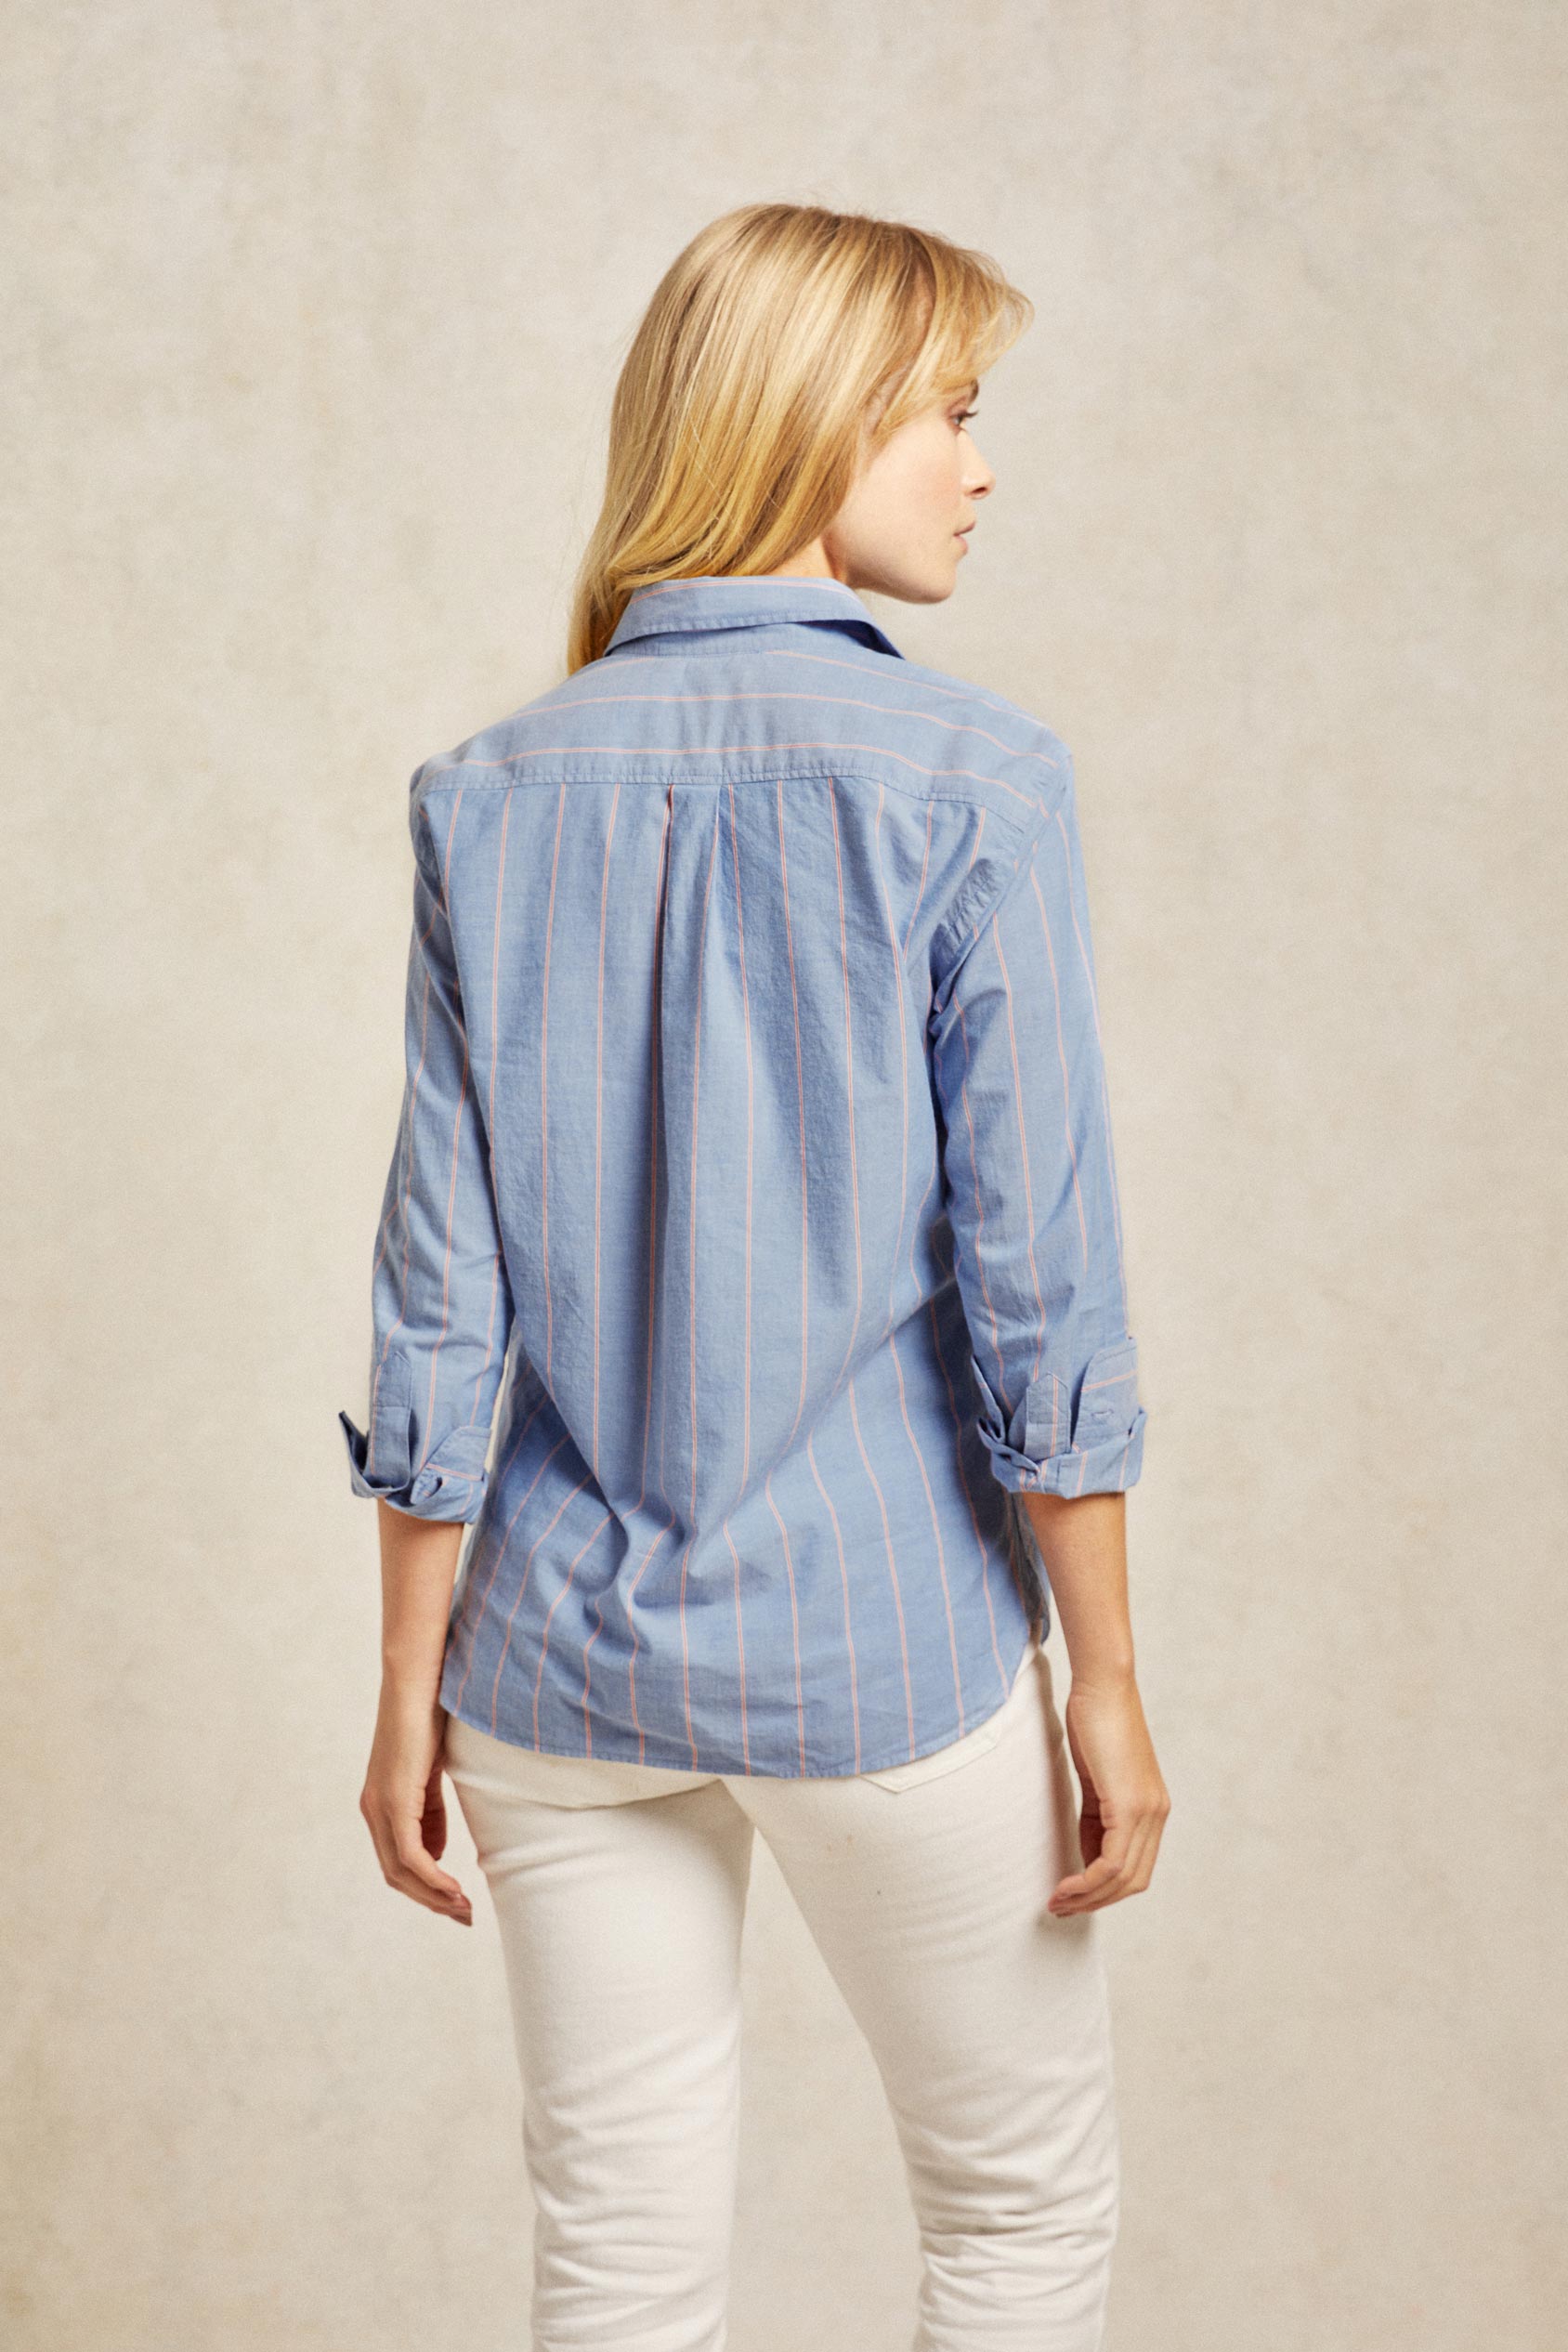 Classic collar women’s shirt in lighter weight cotton fabric. Cut from soft, lighter-weight cotton chambray, the Fennel shirt will see you through the warmer months. Patterned with subtle stripes and tailored to a boyfriend fit. Casual wear. Size XS, S, M, L, XL. Made in Portugal. Machine wash.